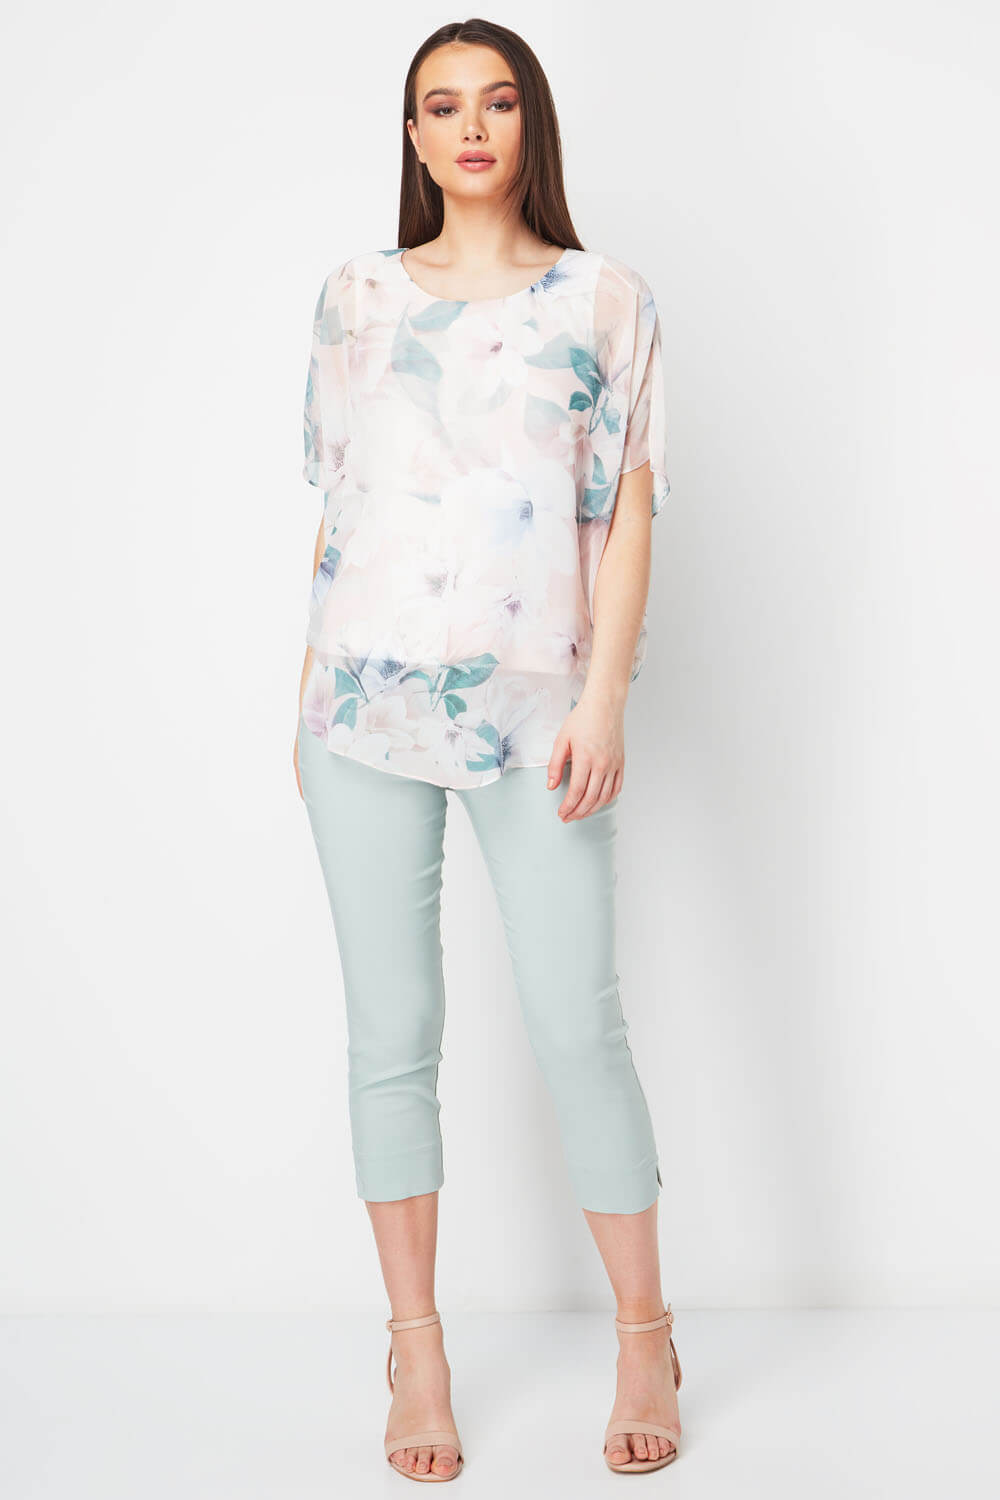 Light Pink Floral Chiffon Overlay Top , Image 2 of 8